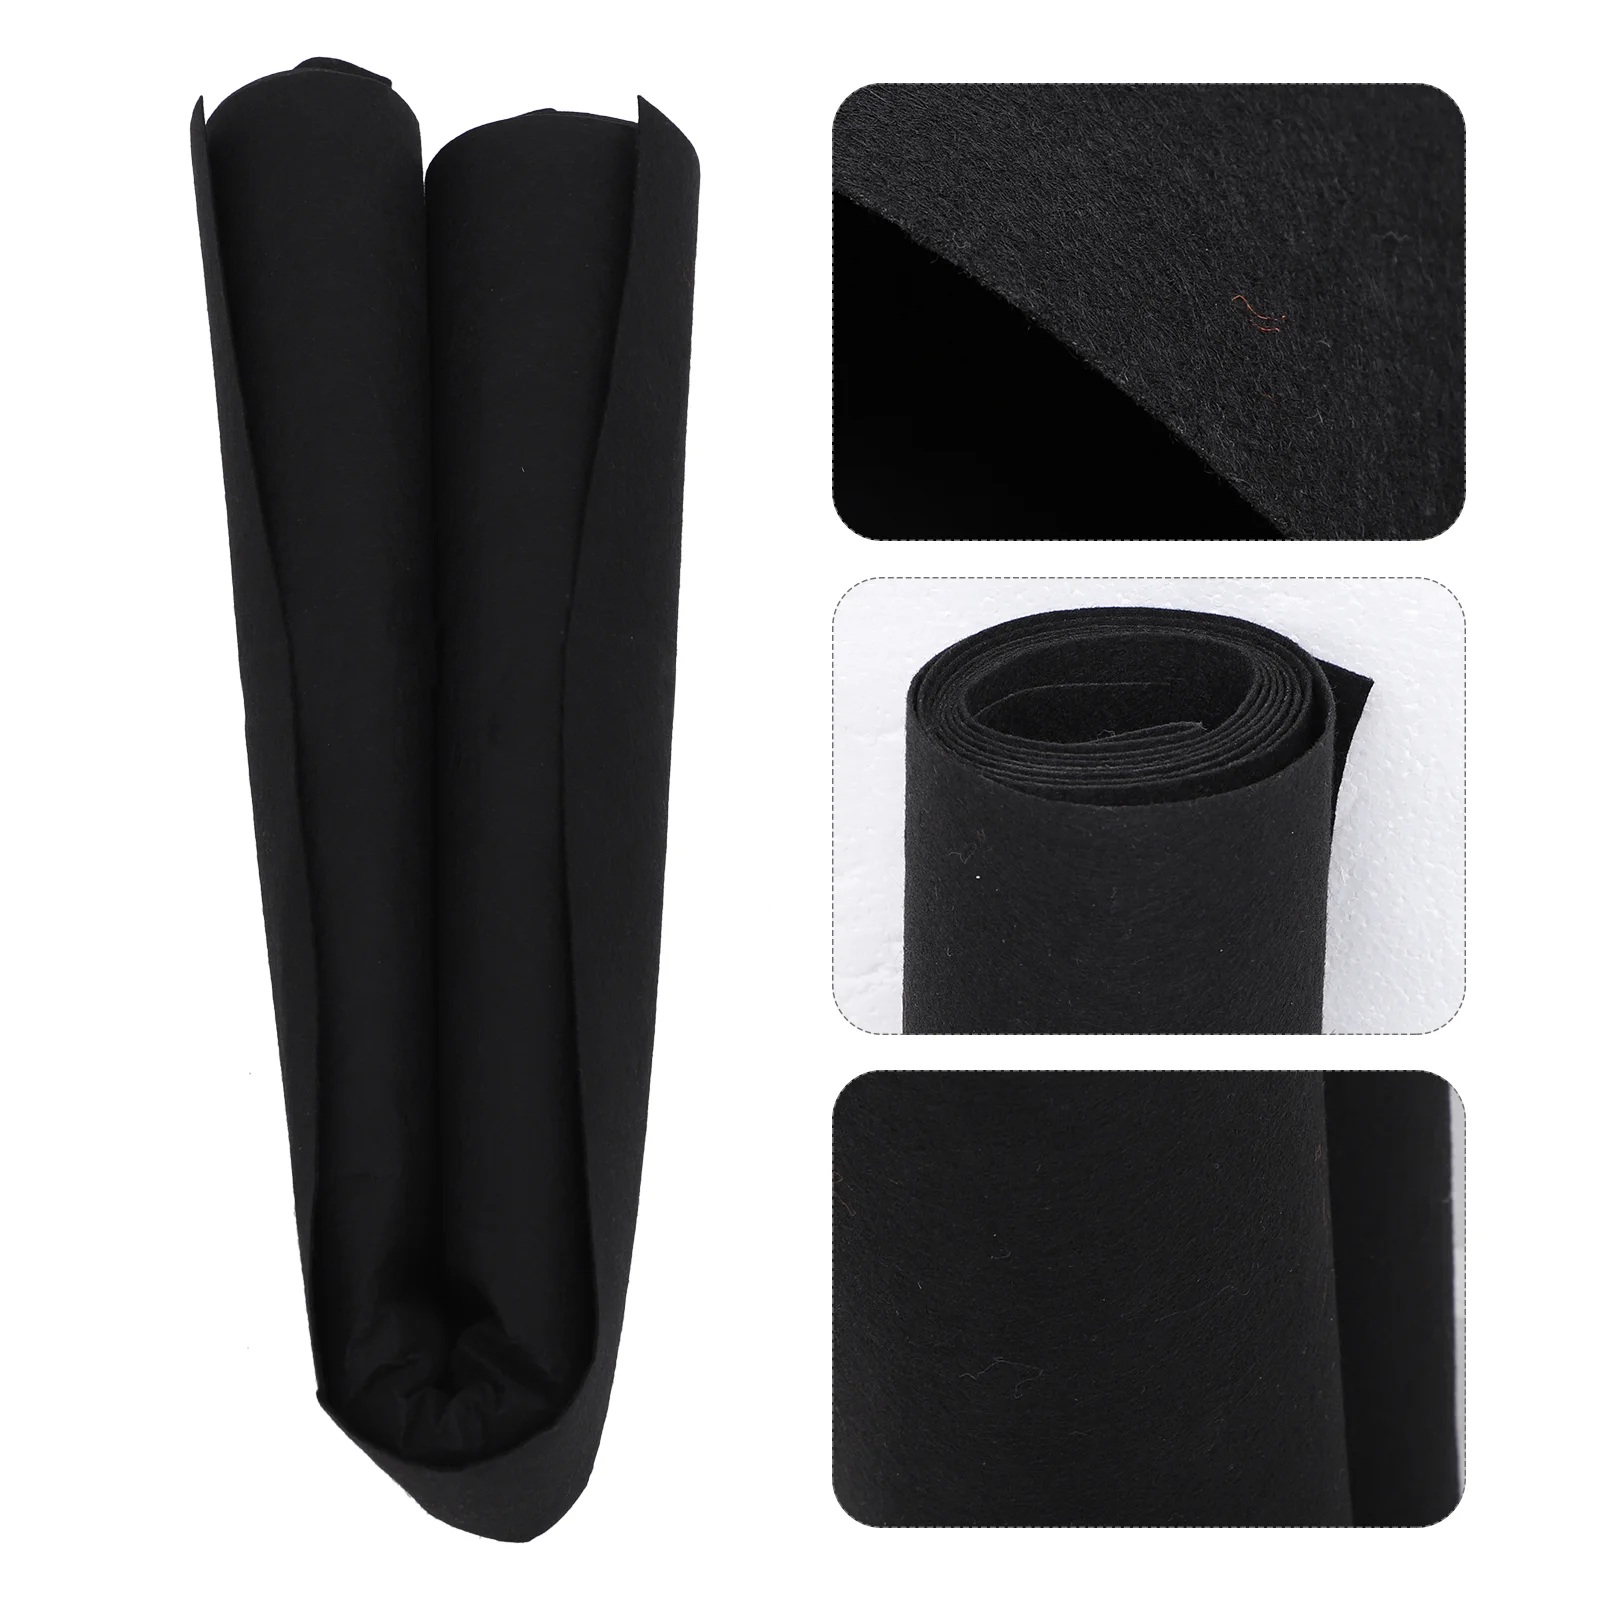 

Flame Retardant Felt Cloth Heat Resistant Material Thermal Welding Blanket for Welders Car Fabric Cuttable